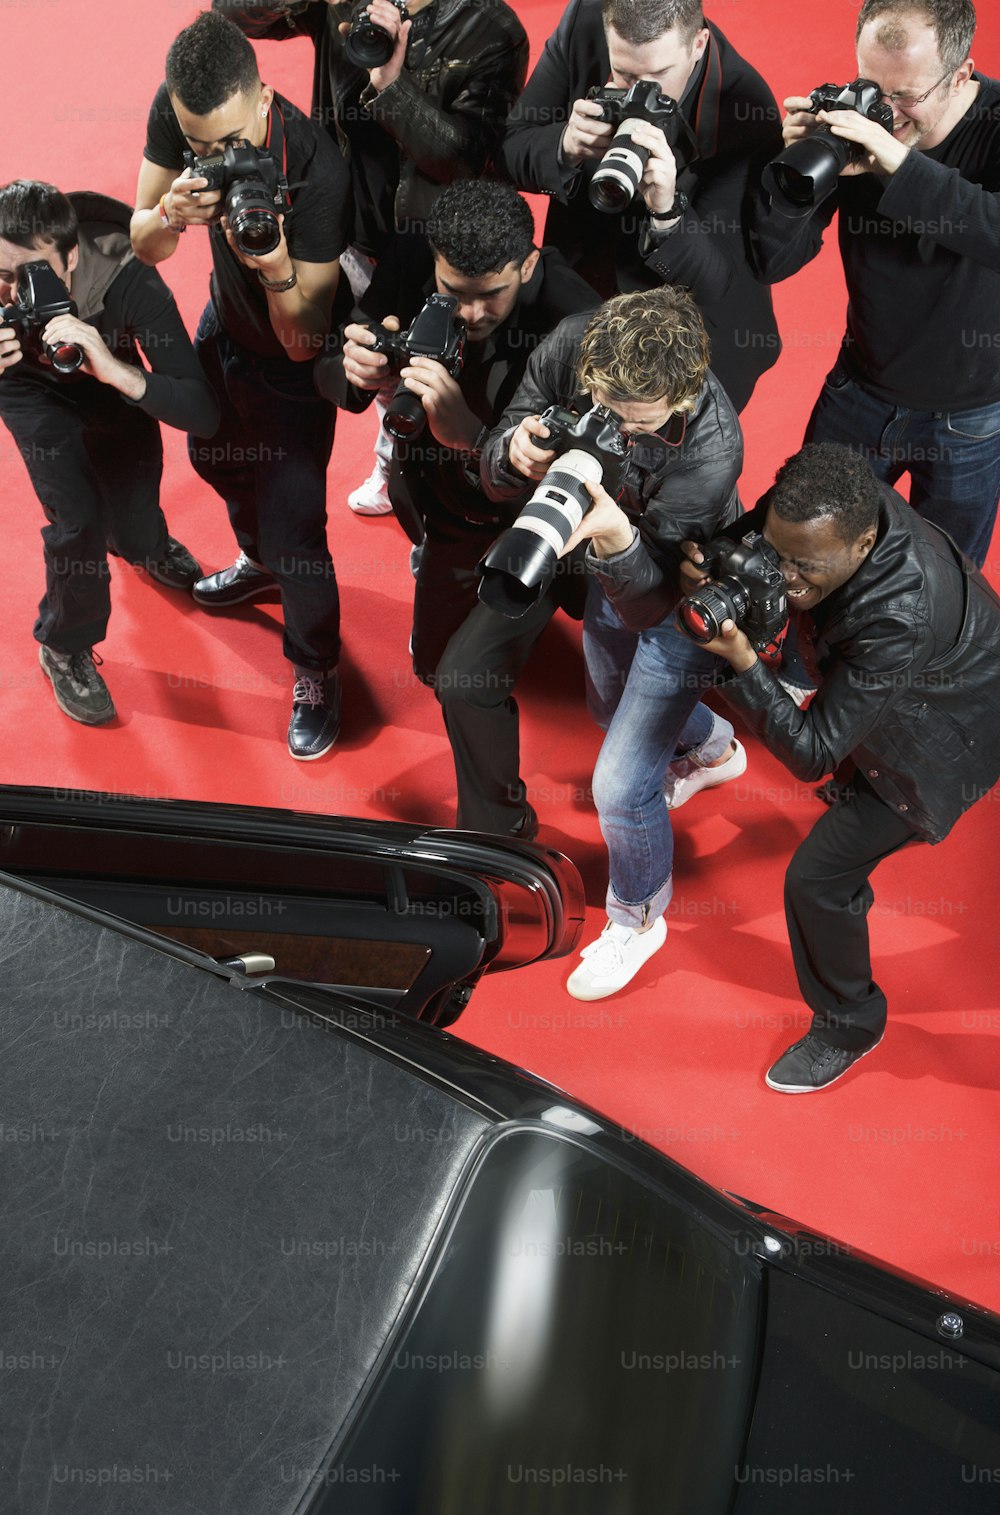 a group of photographers taking pictures of a man on a red carpet